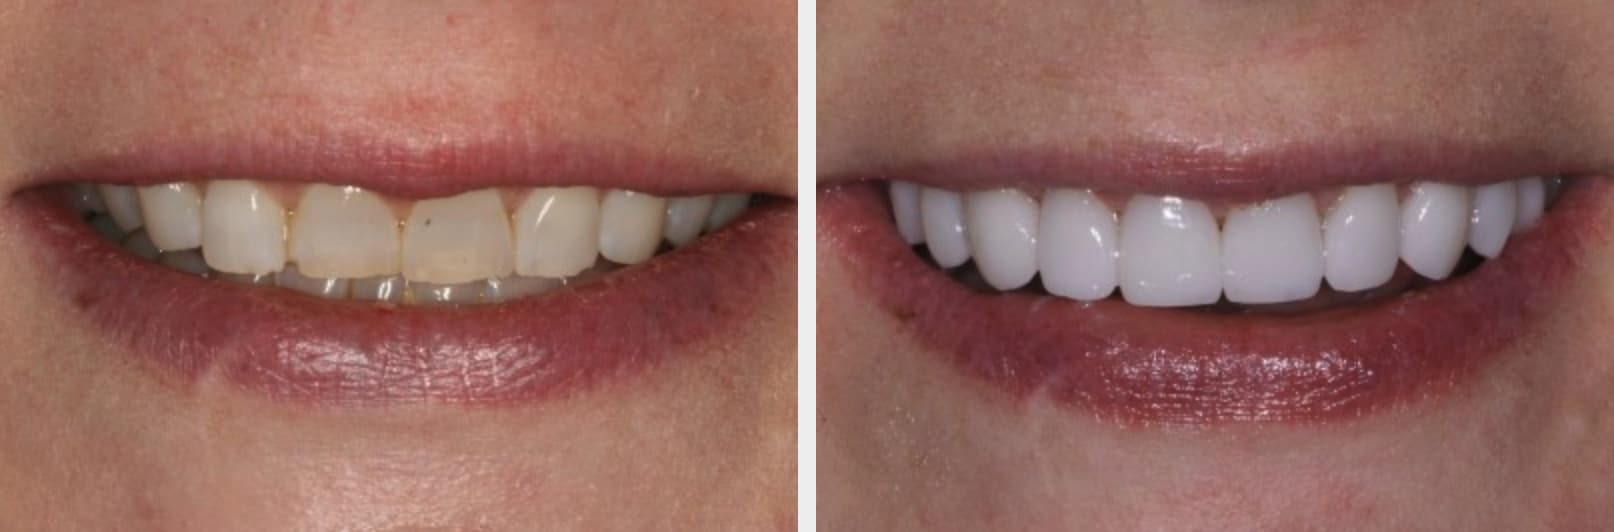 before and after close up of woman's teeth after dental implants